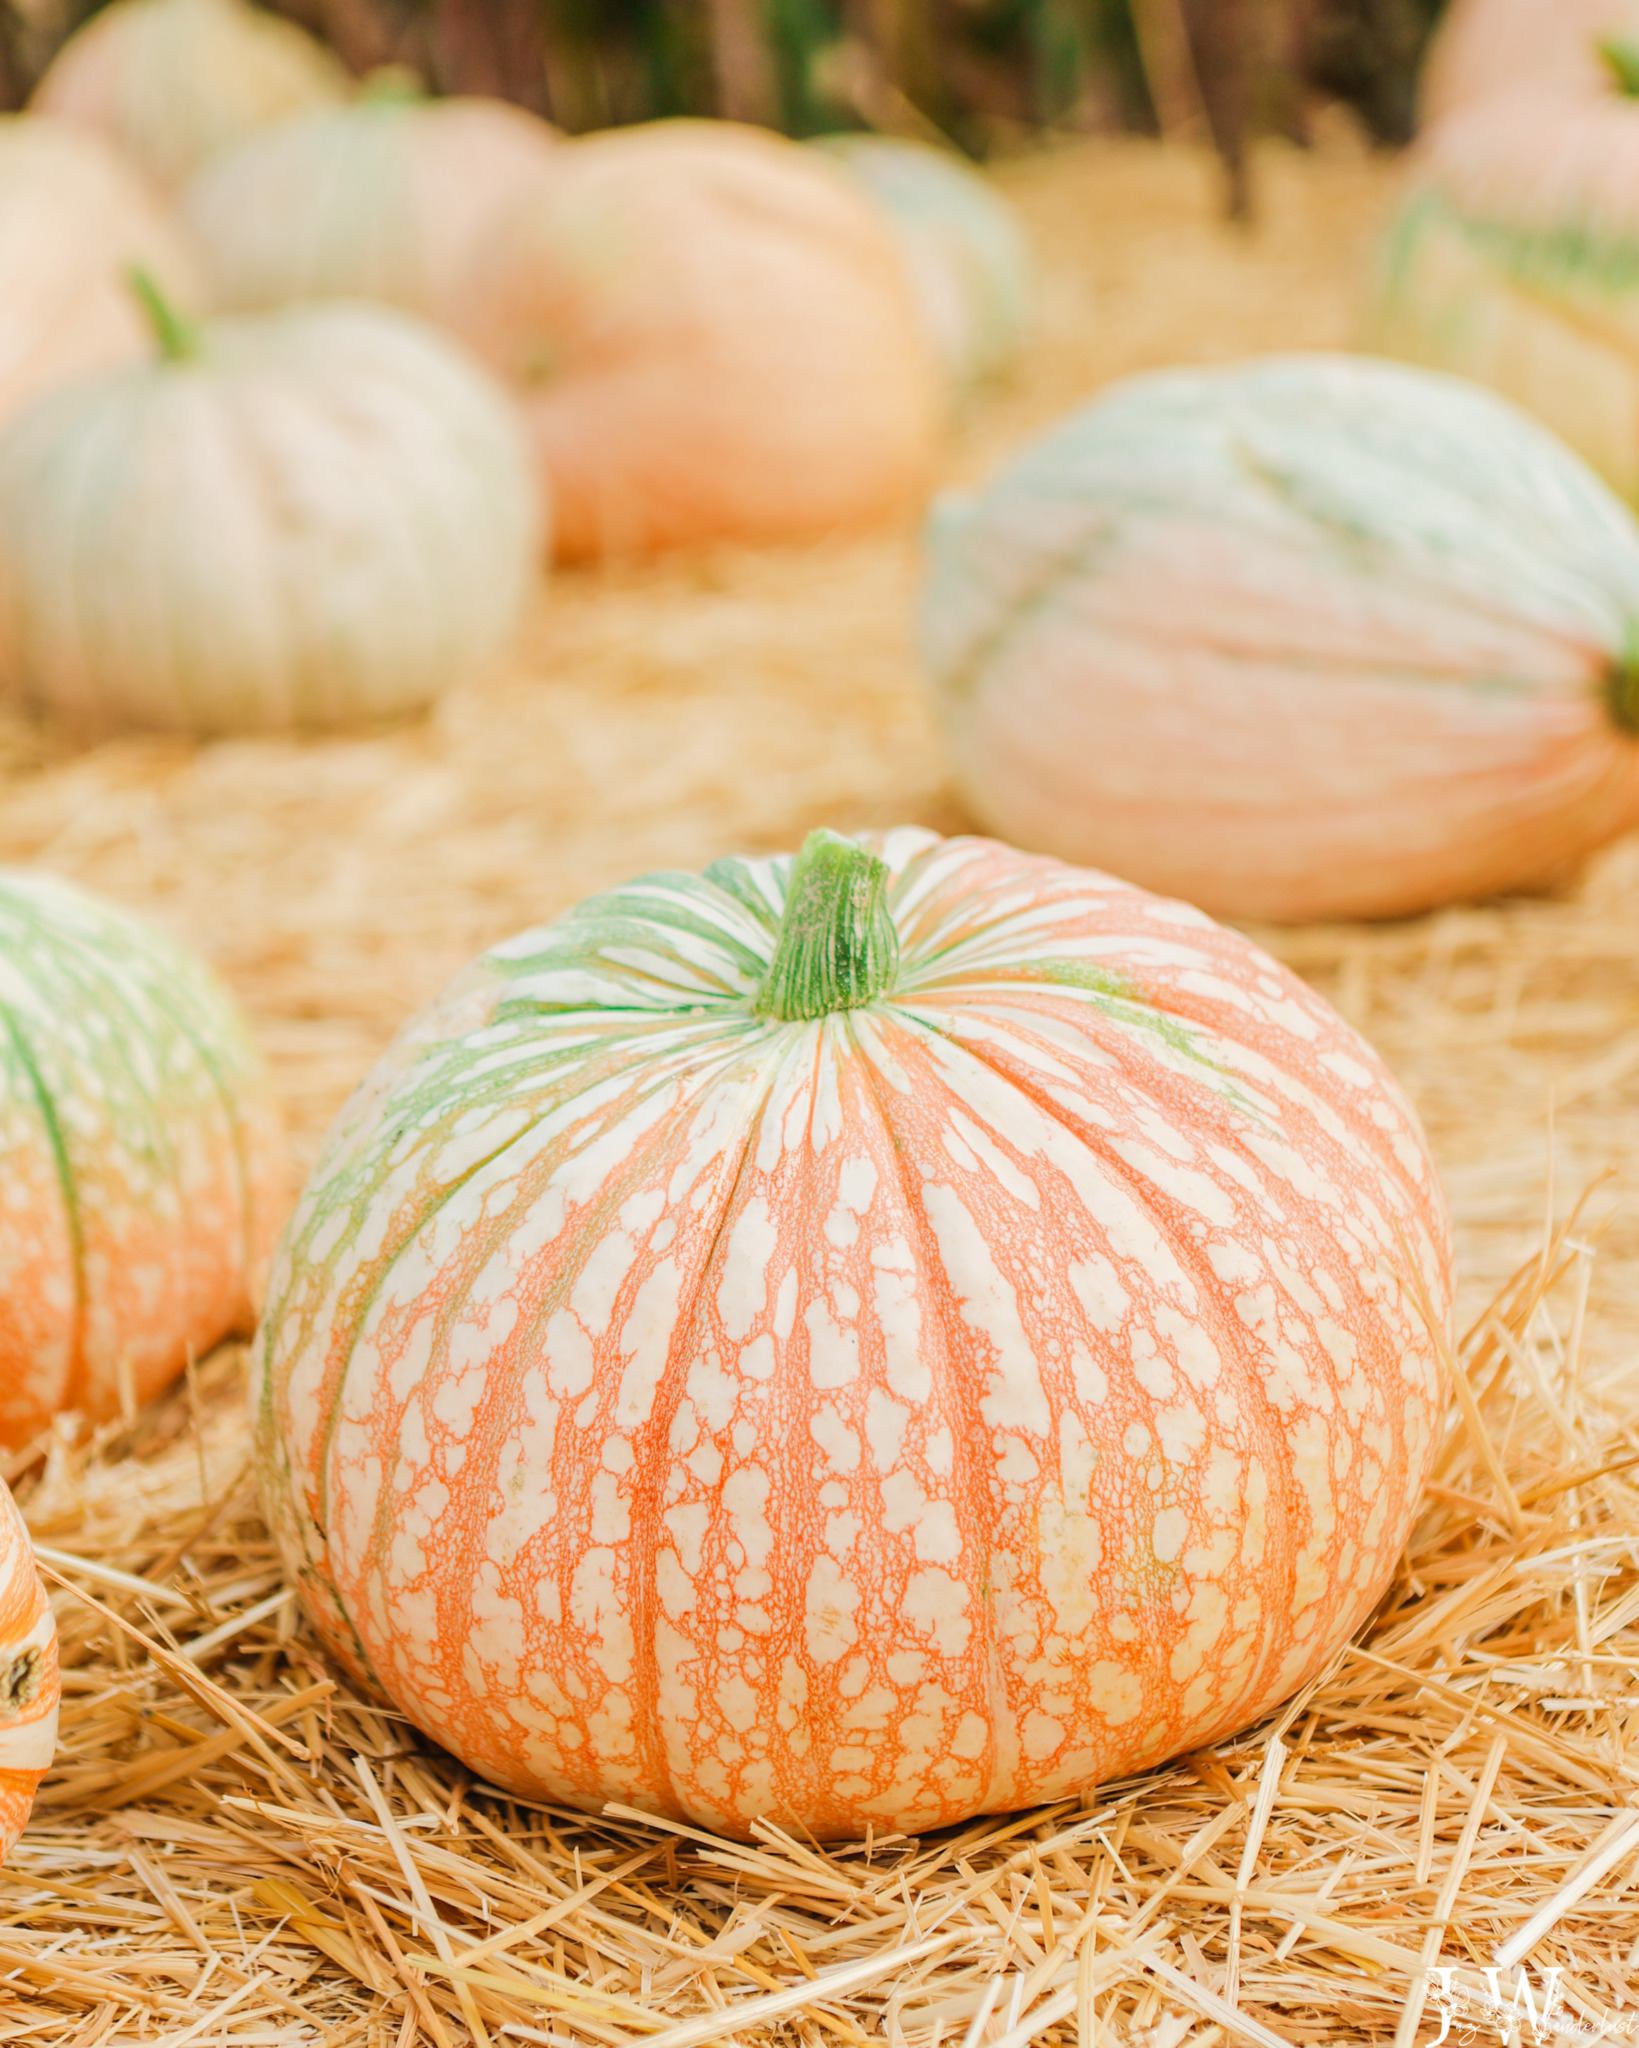 One Too Many pumpkin has red veins as fruit skin that crawl across the white background